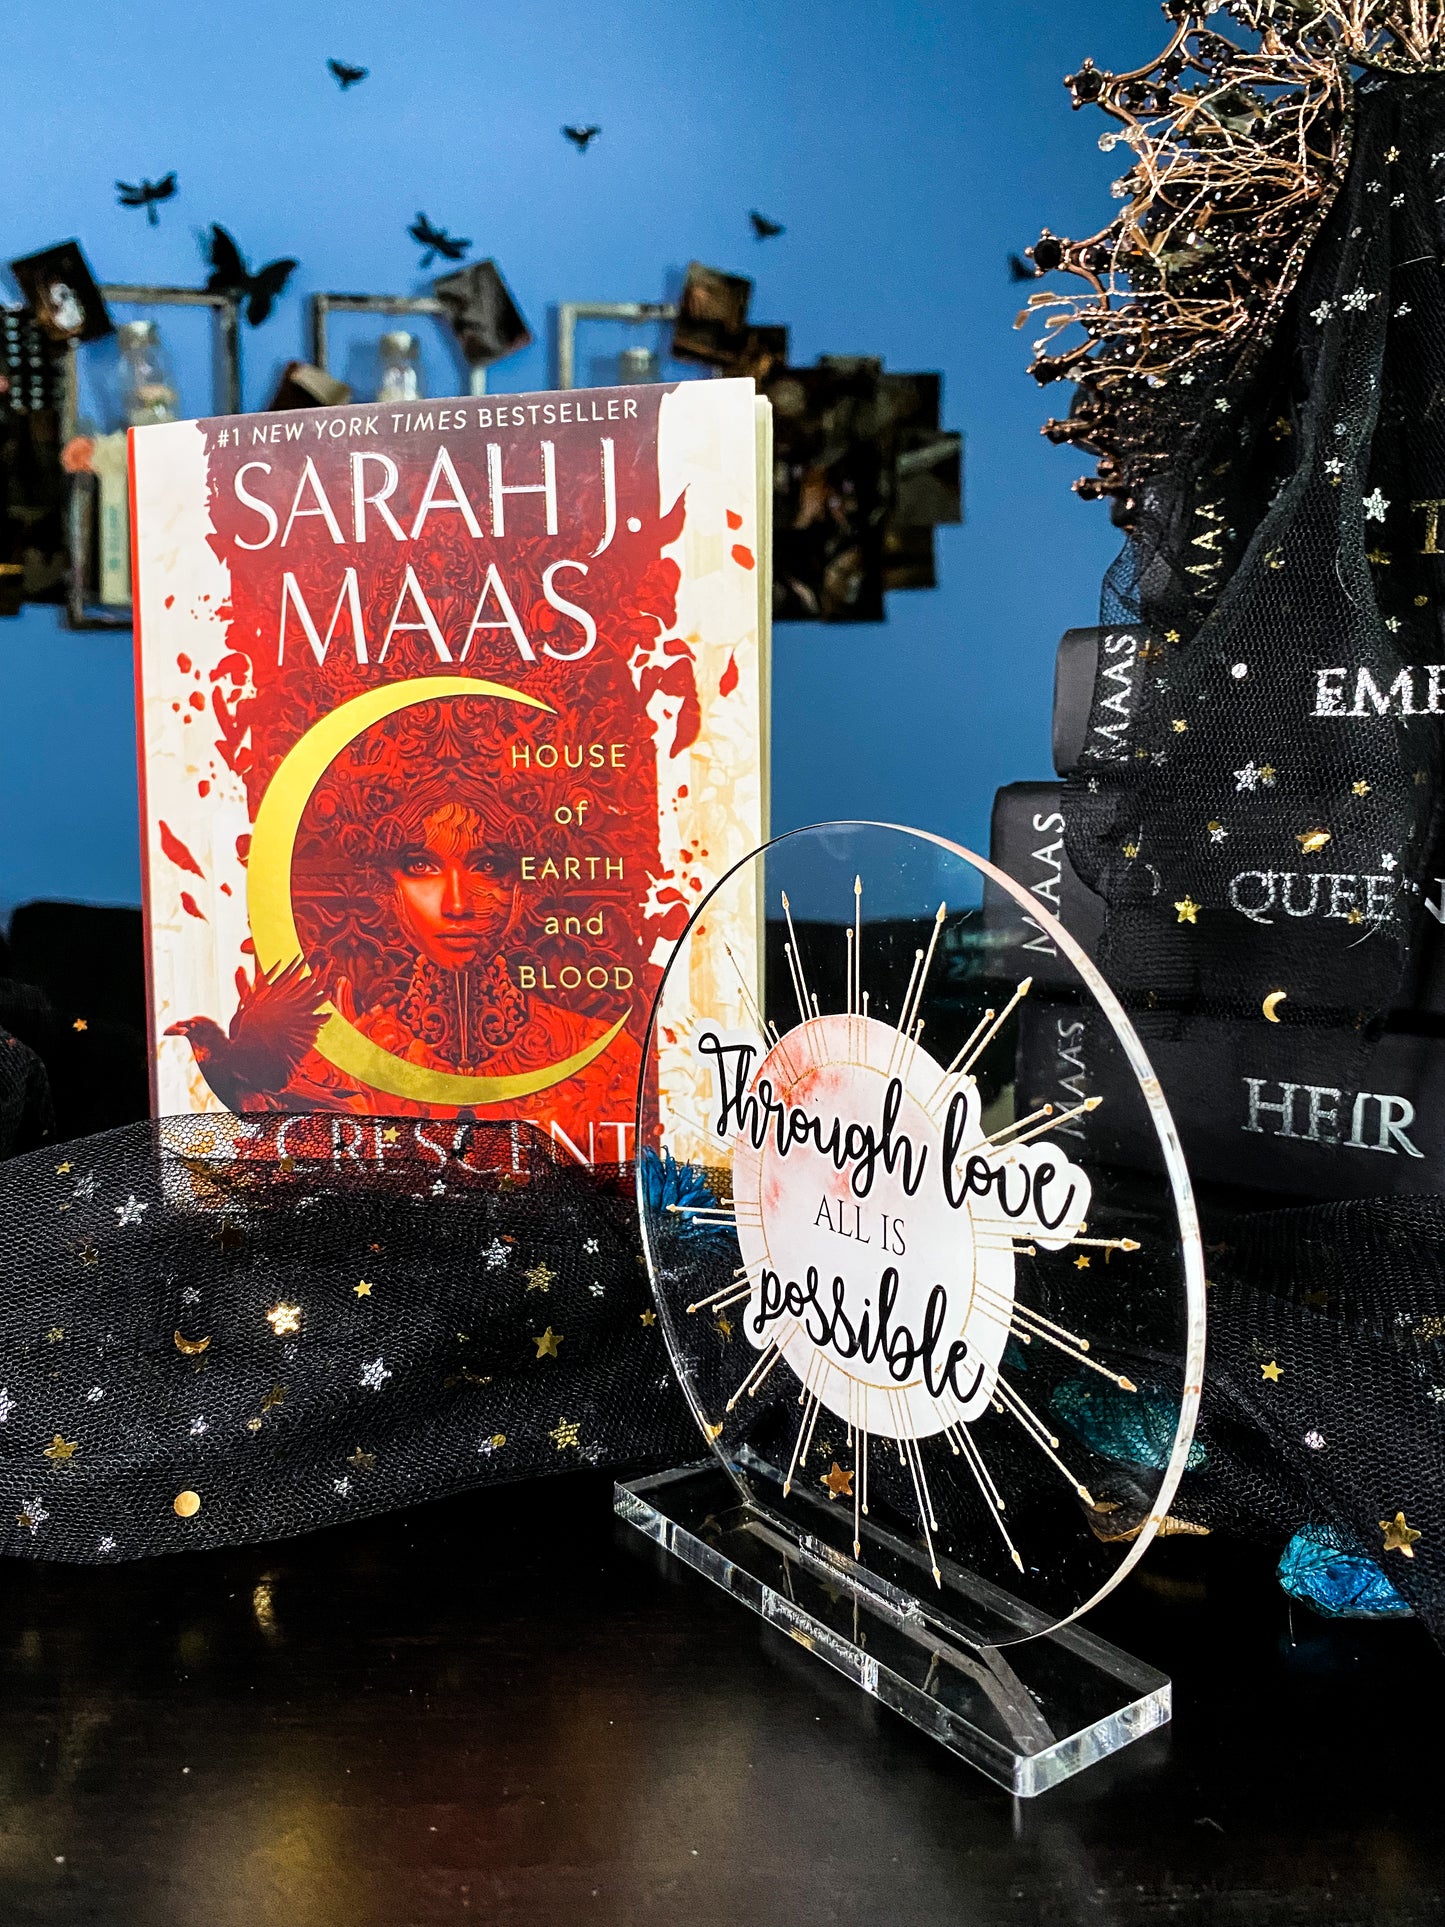 "Through love, all is possible" - Crescent City Series - Freestanding Bookshelf / Desktop Acrylic Accessory - Officially licensed by Sarah J. Maas - D35